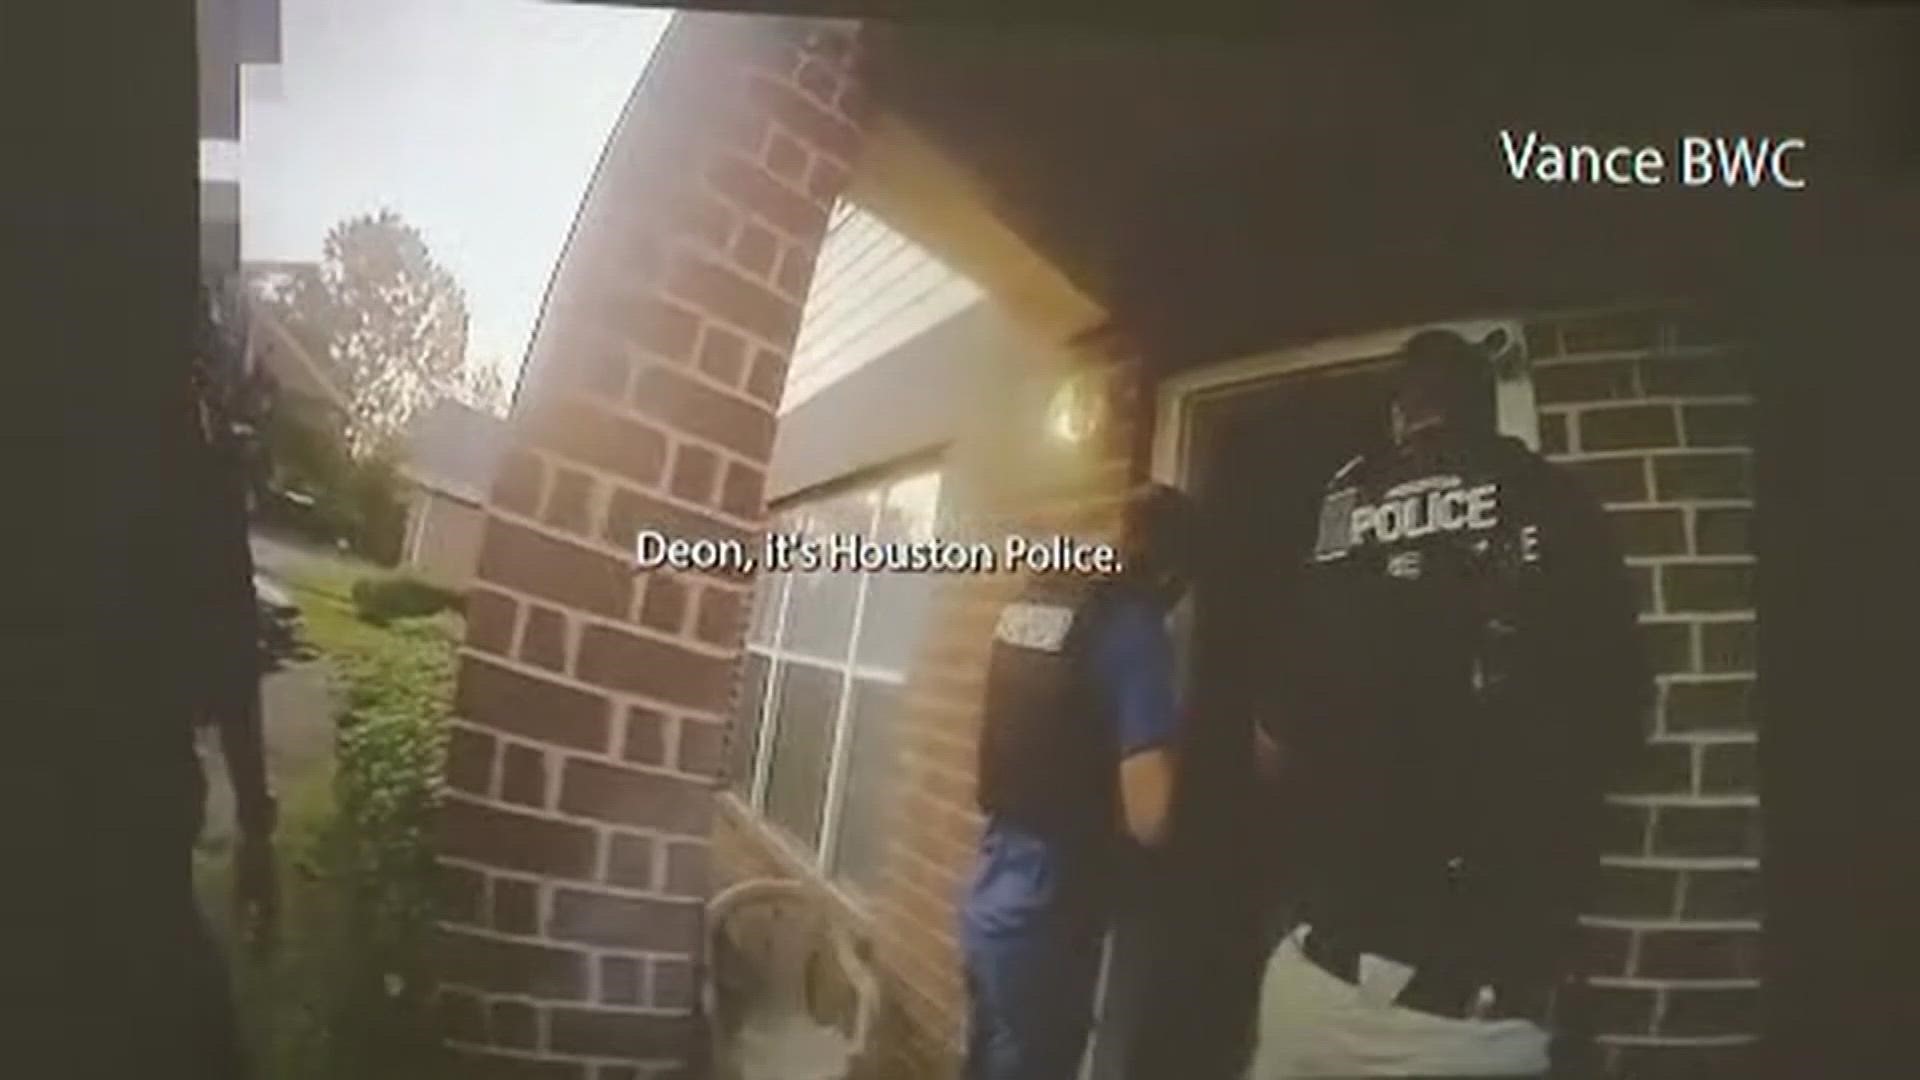 The Houston Police Department has released bodycam footage of the shootout that left an officer dead and another injured in September.